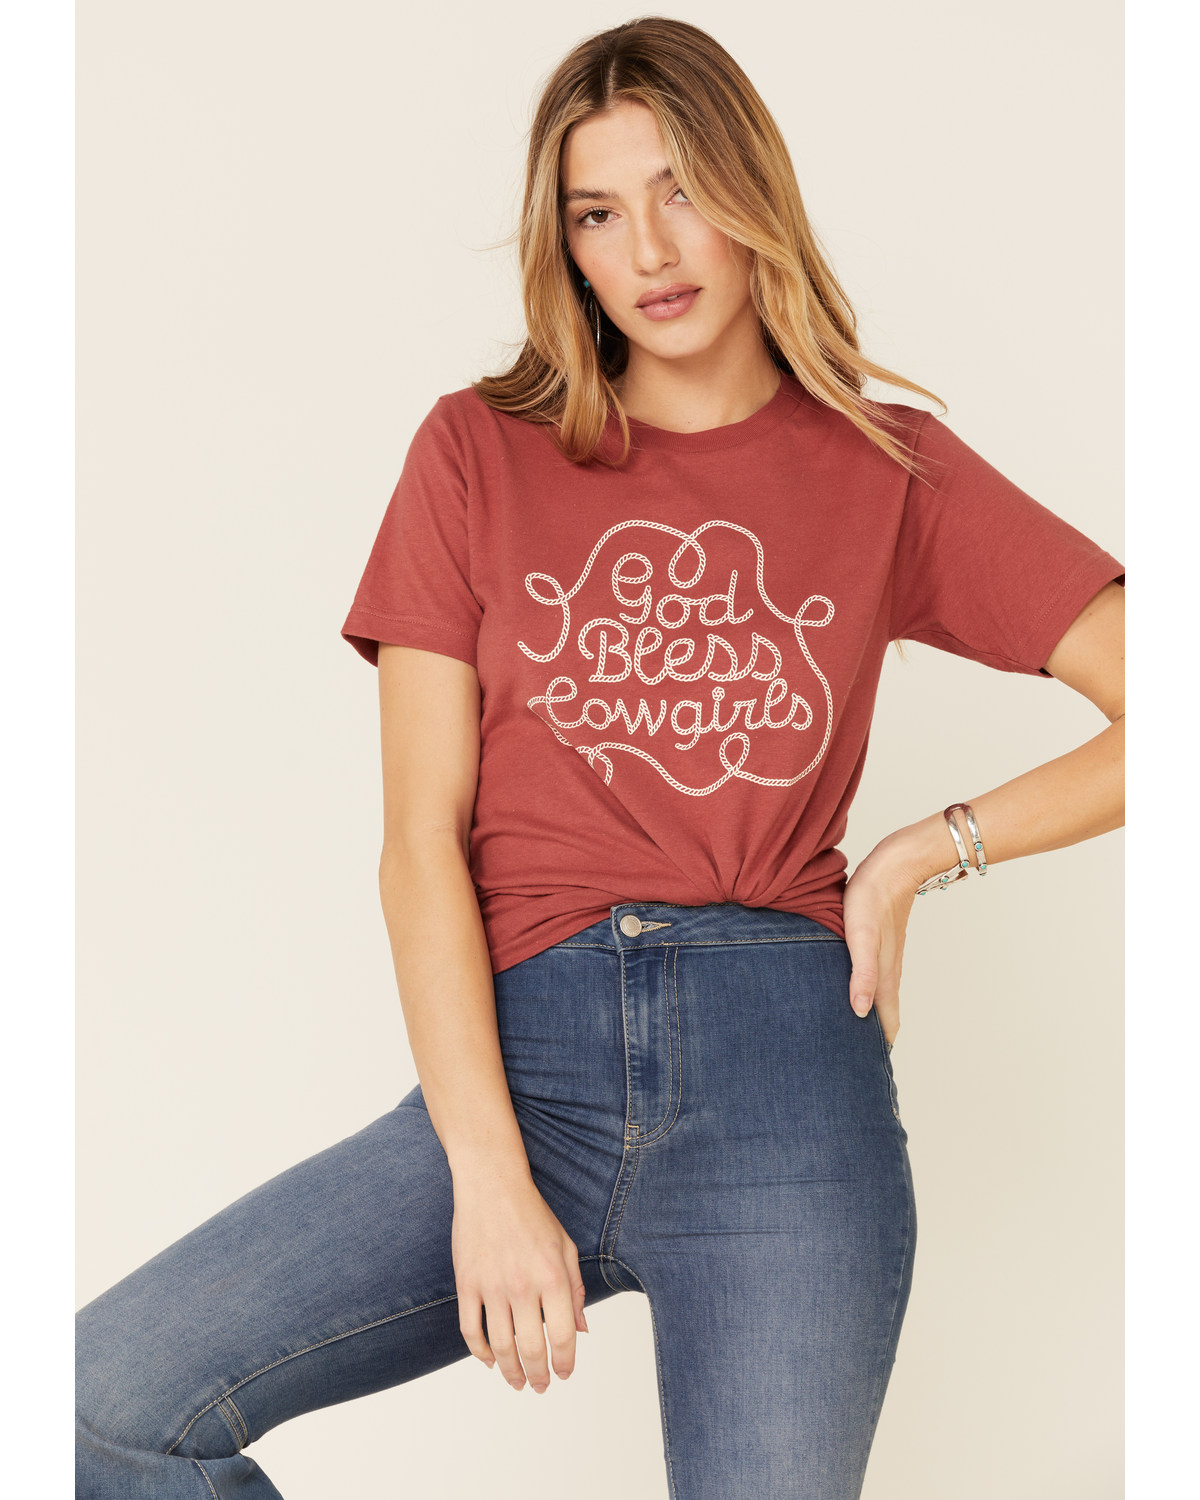 Ali Dee Women's God Bless Cowgirls Graphic Tee